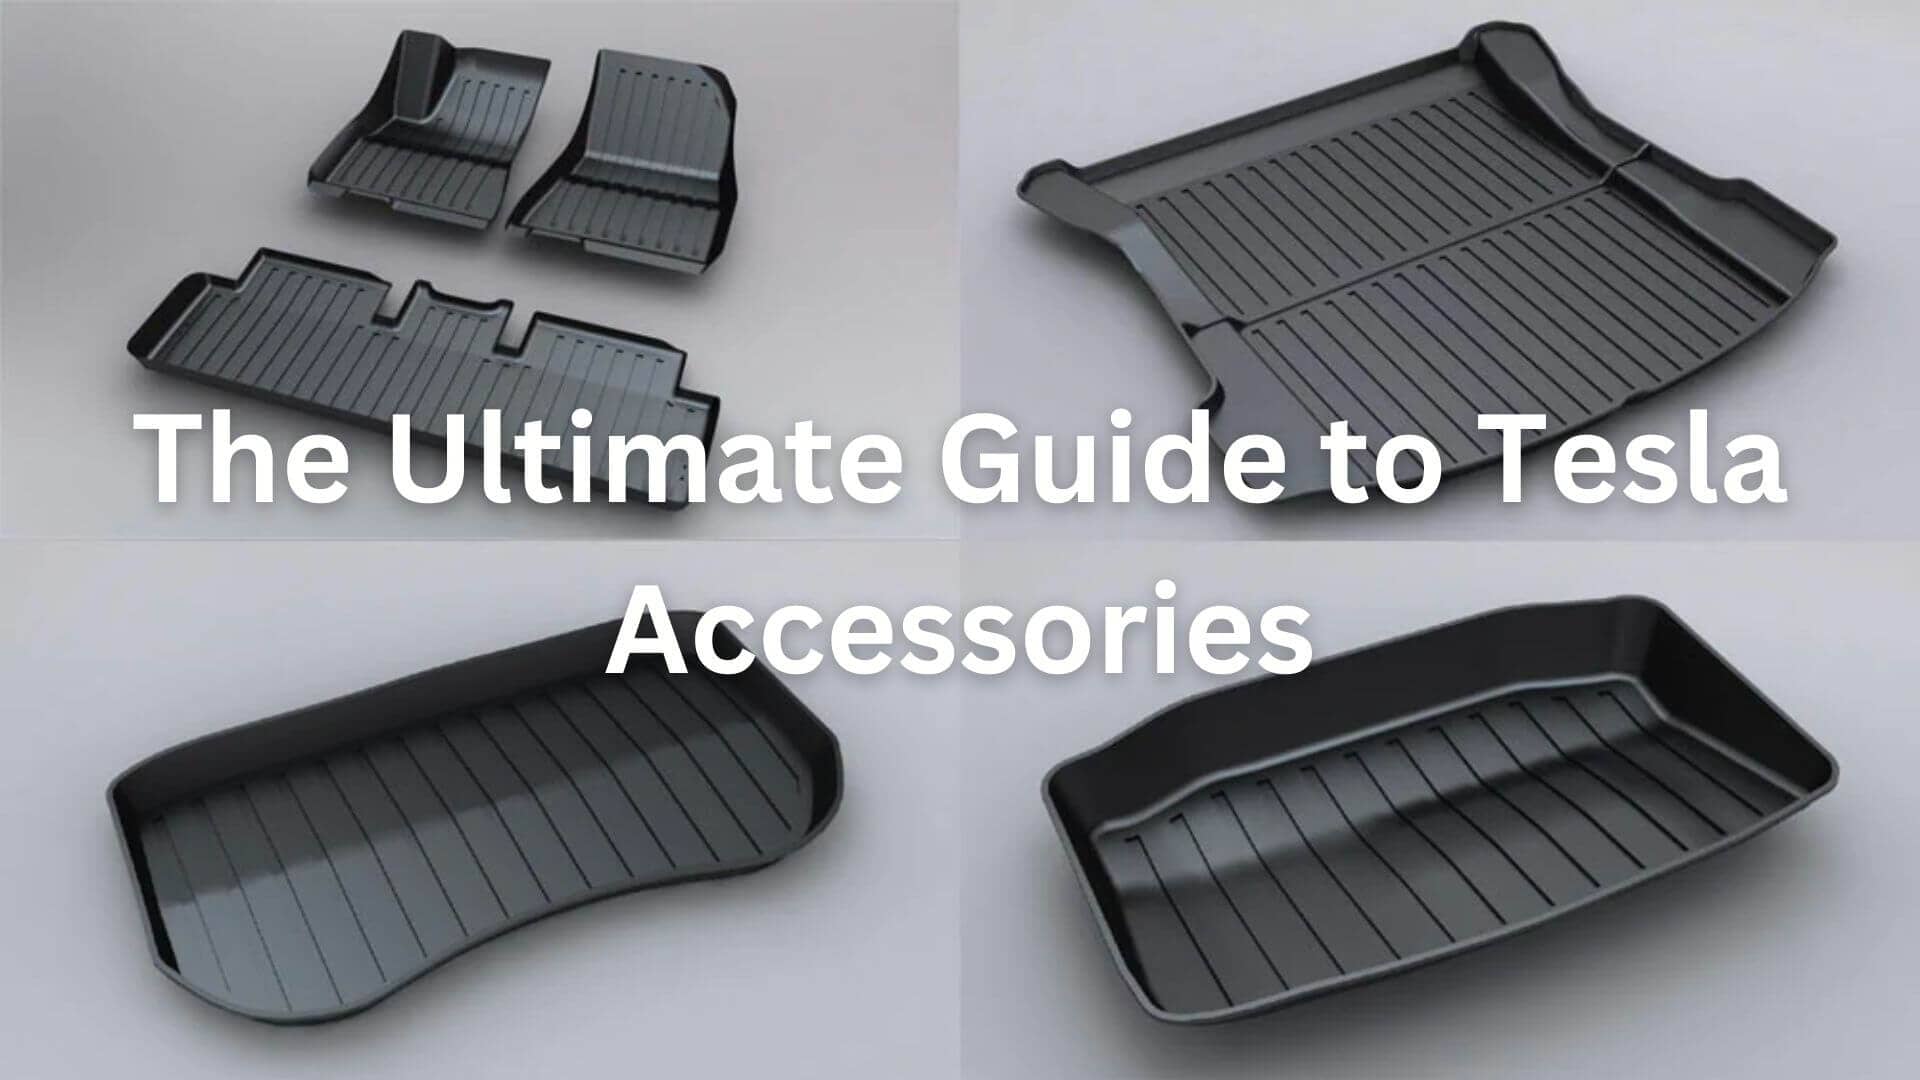 The Ultimate Guide to Tesla Accessories: Model 3, Model Y, Model S, and Model X